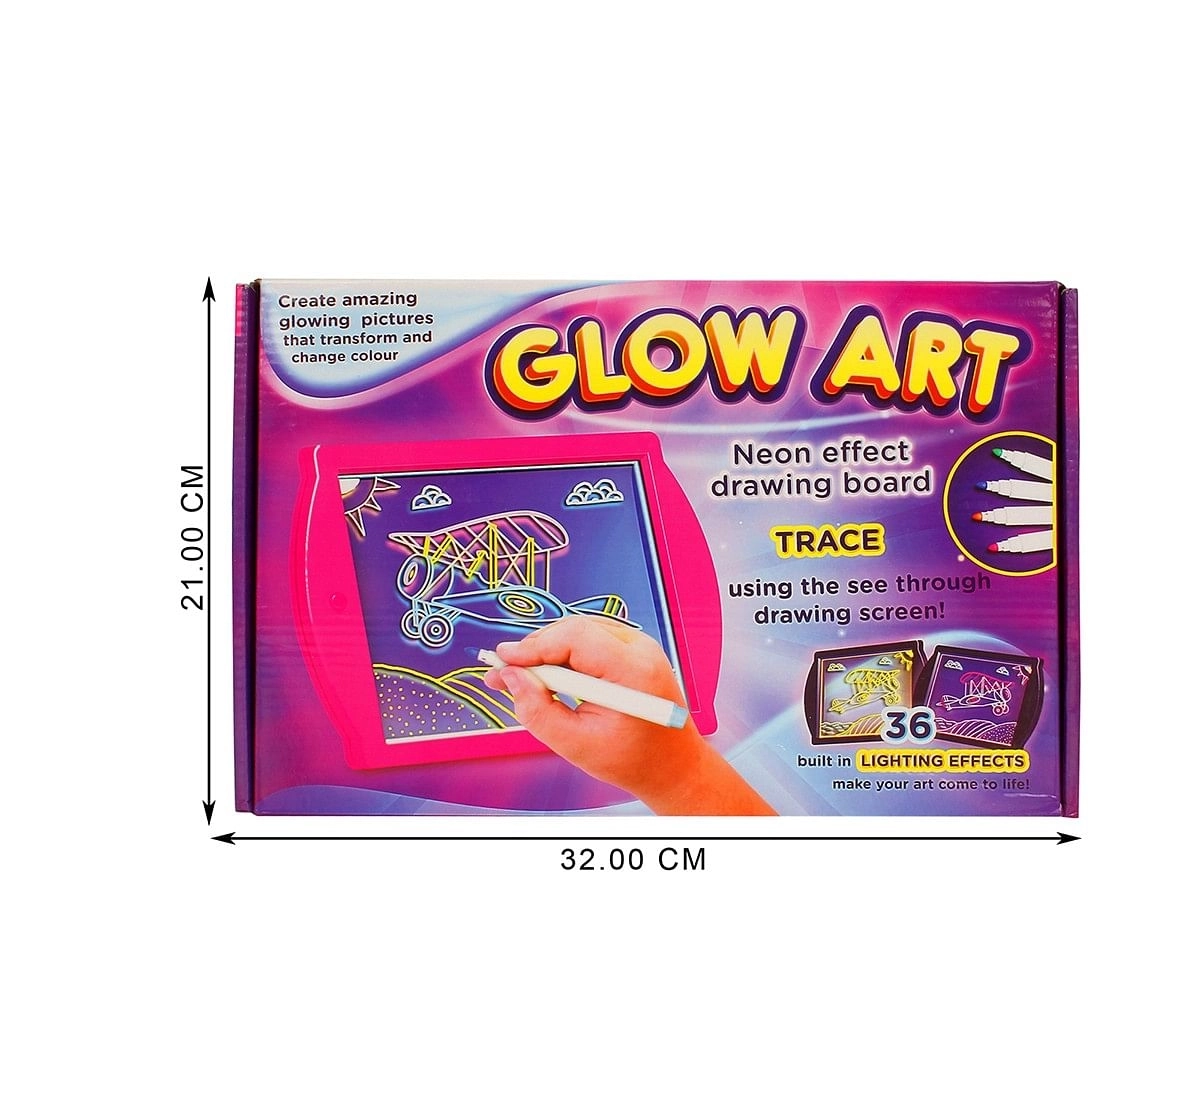 Sirius Toys Smn Glow Art Neon Effect Drawing Baord Activity Table & Boards for Kids age 3Y+ (Black)